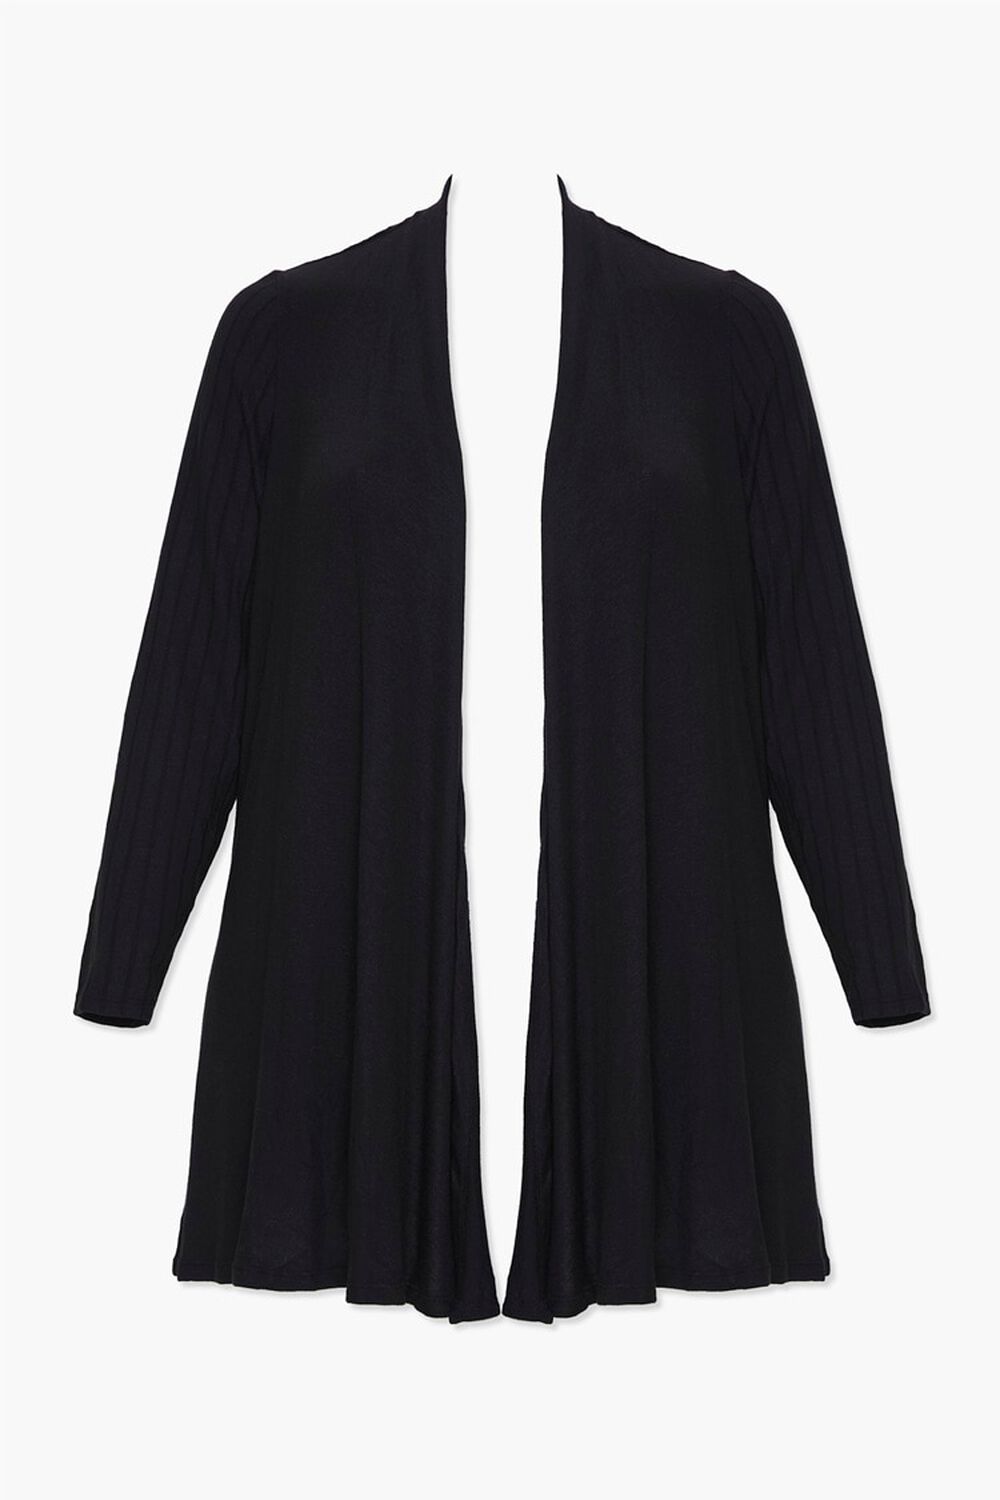 Plus Size Ribbed Open-Front Cardigan, image 1